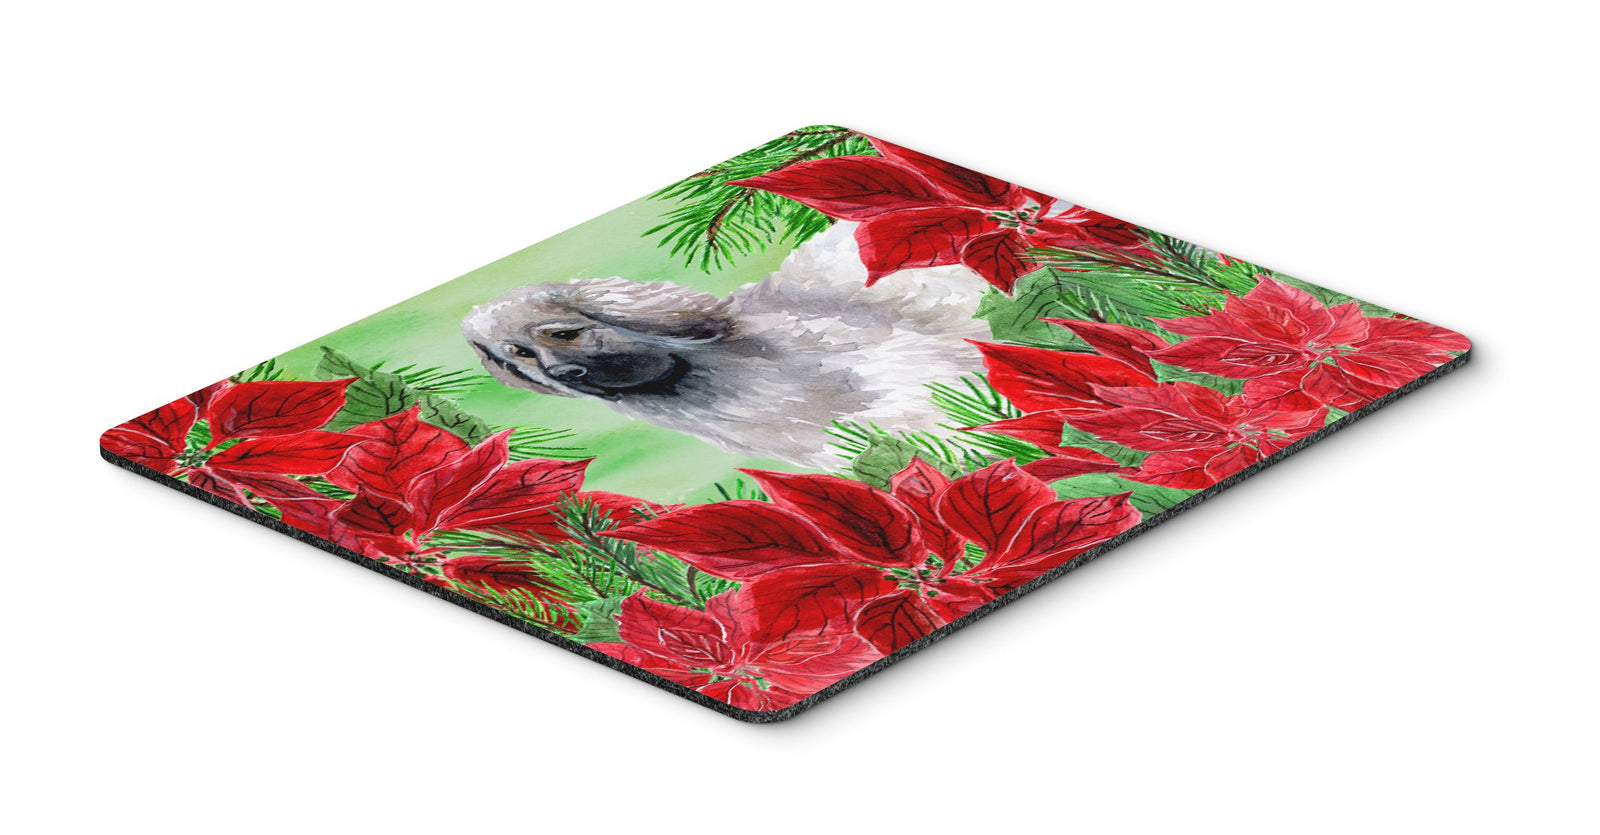 Moscow Watchdog Poinsettas Mouse Pad, Hot Pad or Trivet CK1321MP by Caroline's Treasures